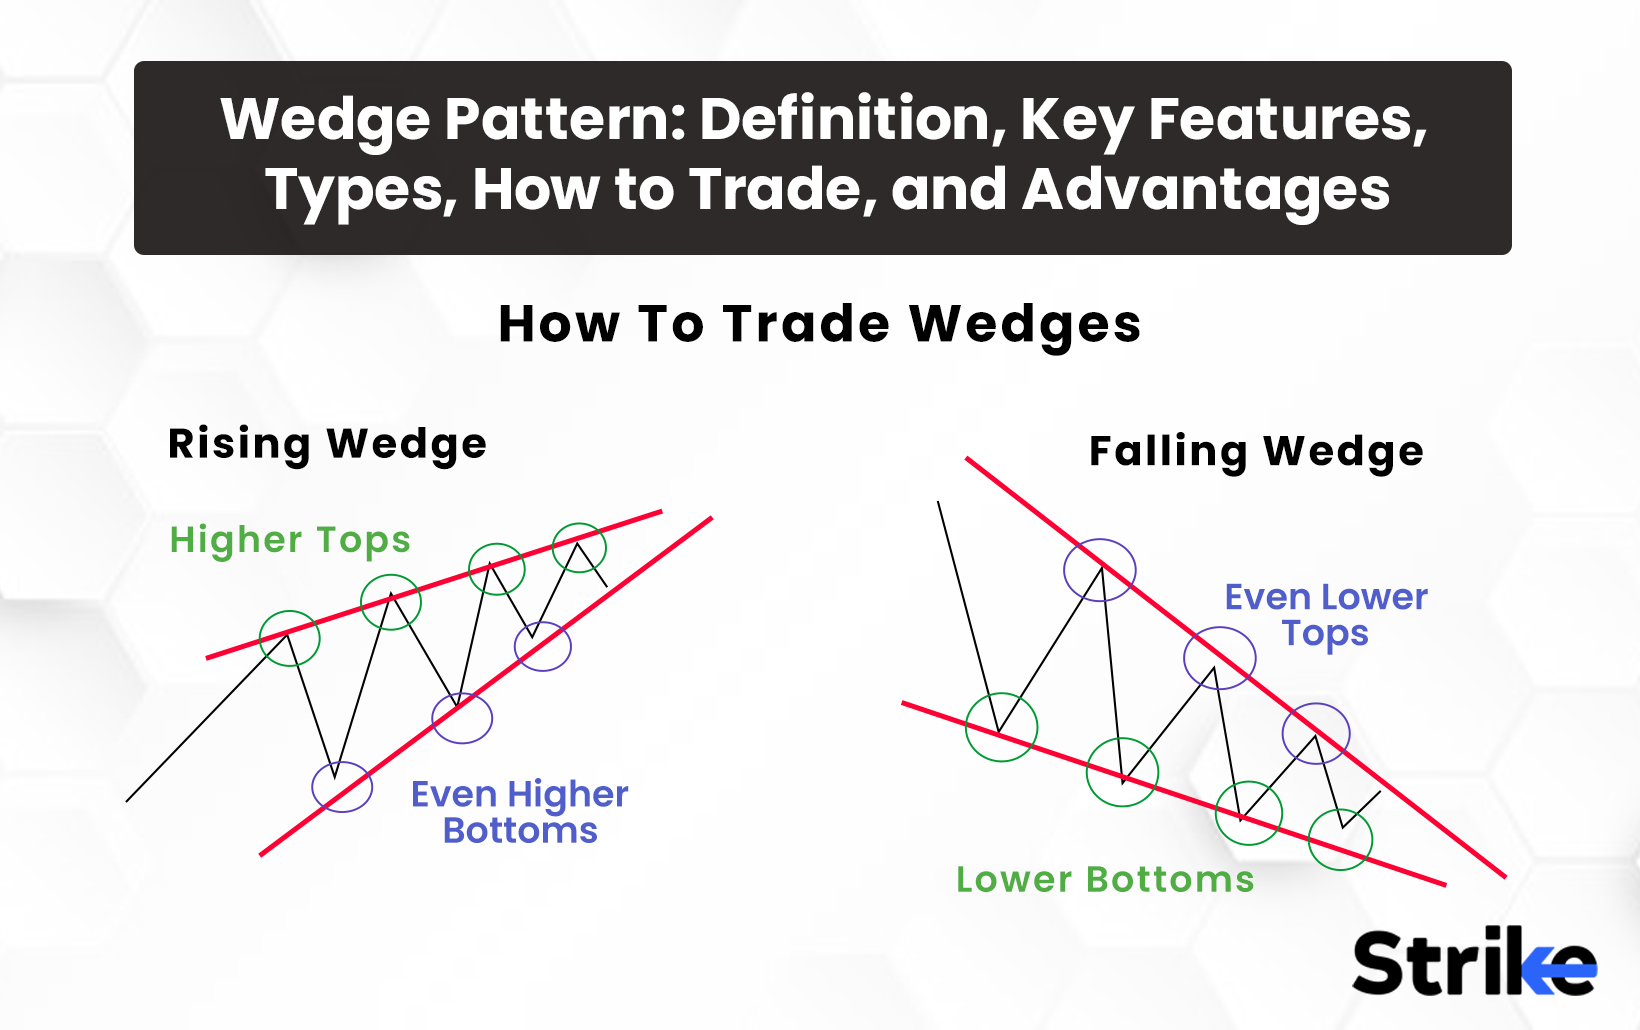 Wedge Pattern: Definition, Key Features, Types, How to Trade, and Advantages